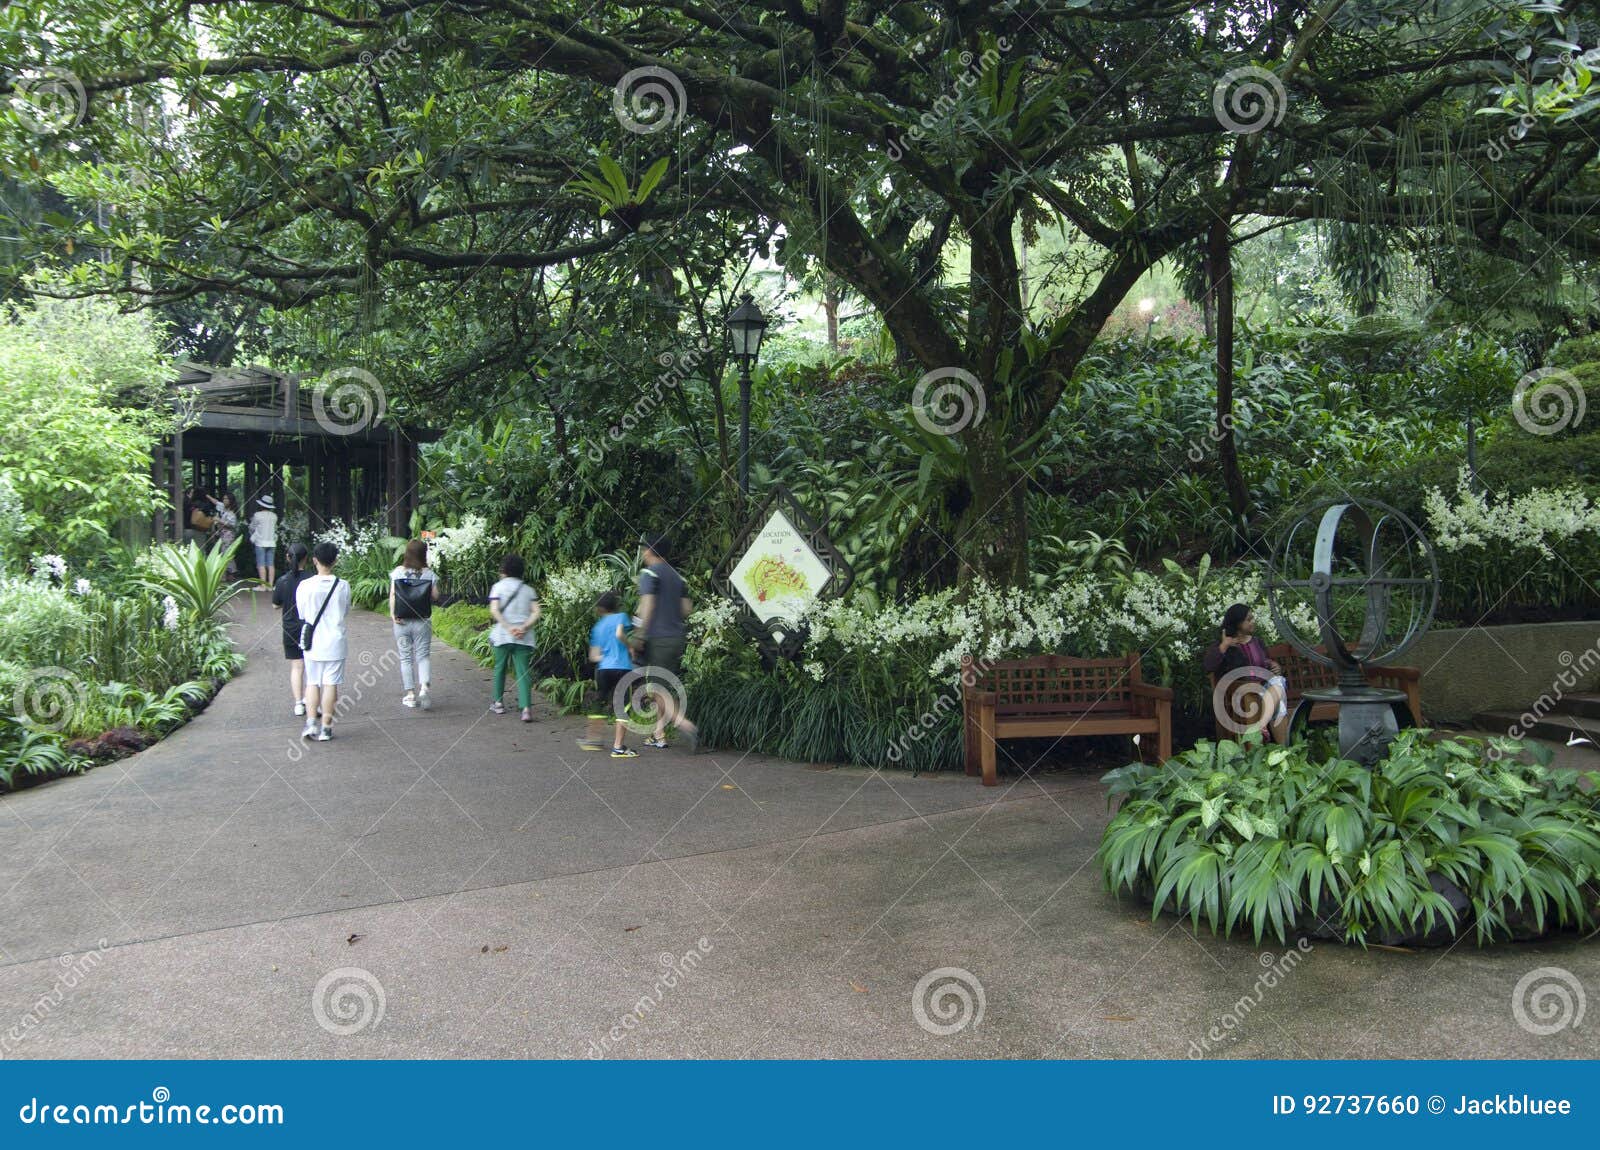 503 Botanical People Singapore Photos Free Royalty Free Stock Photos From Dreamstime